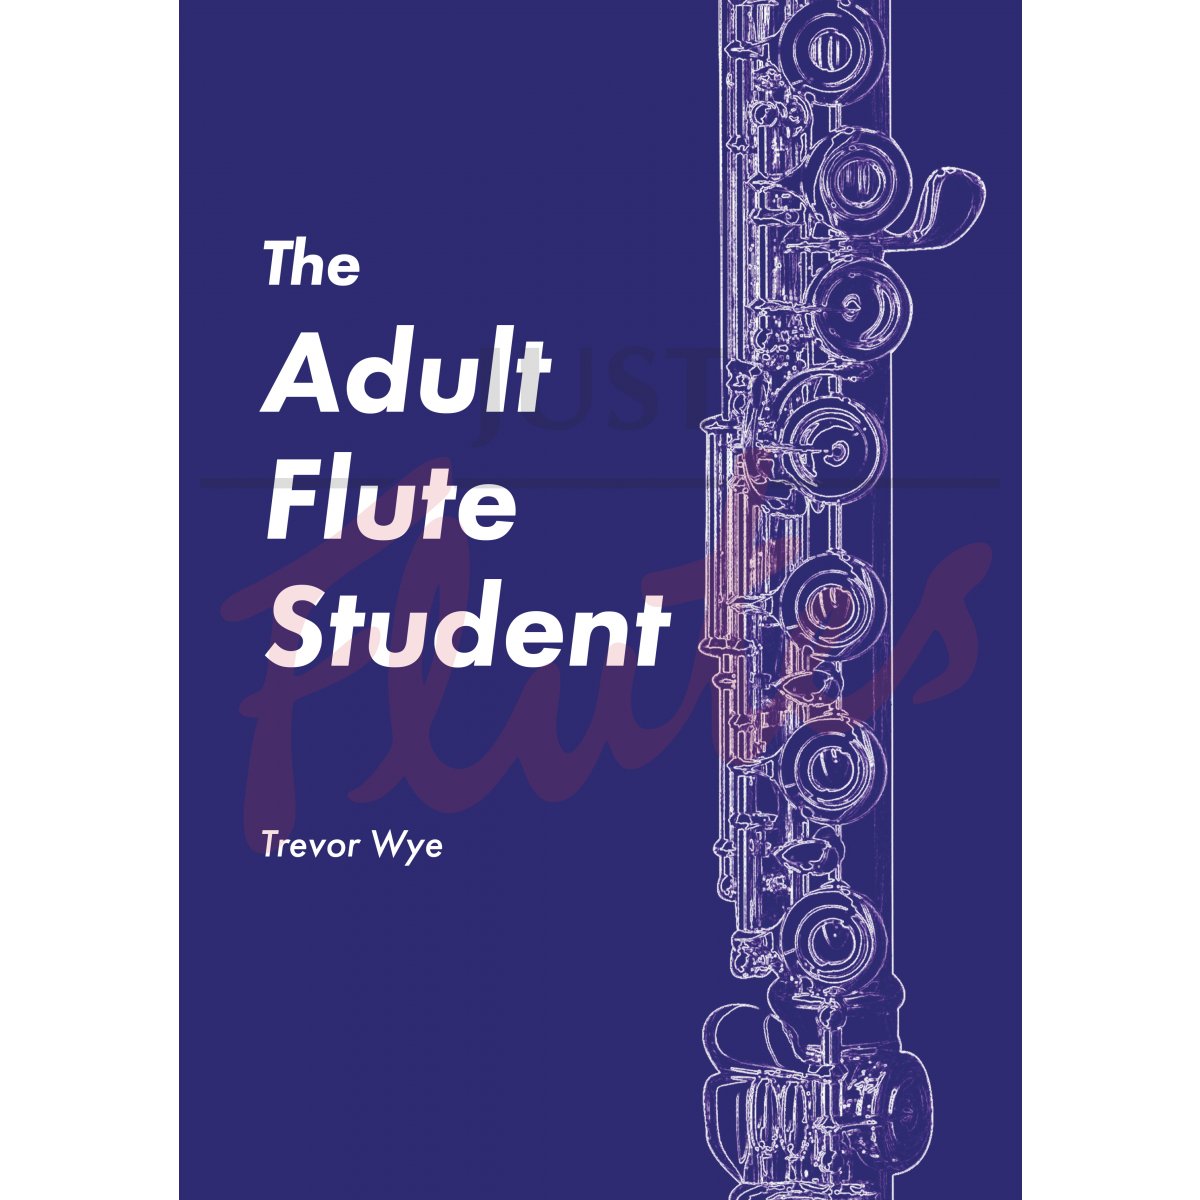 The Adult Flute Student